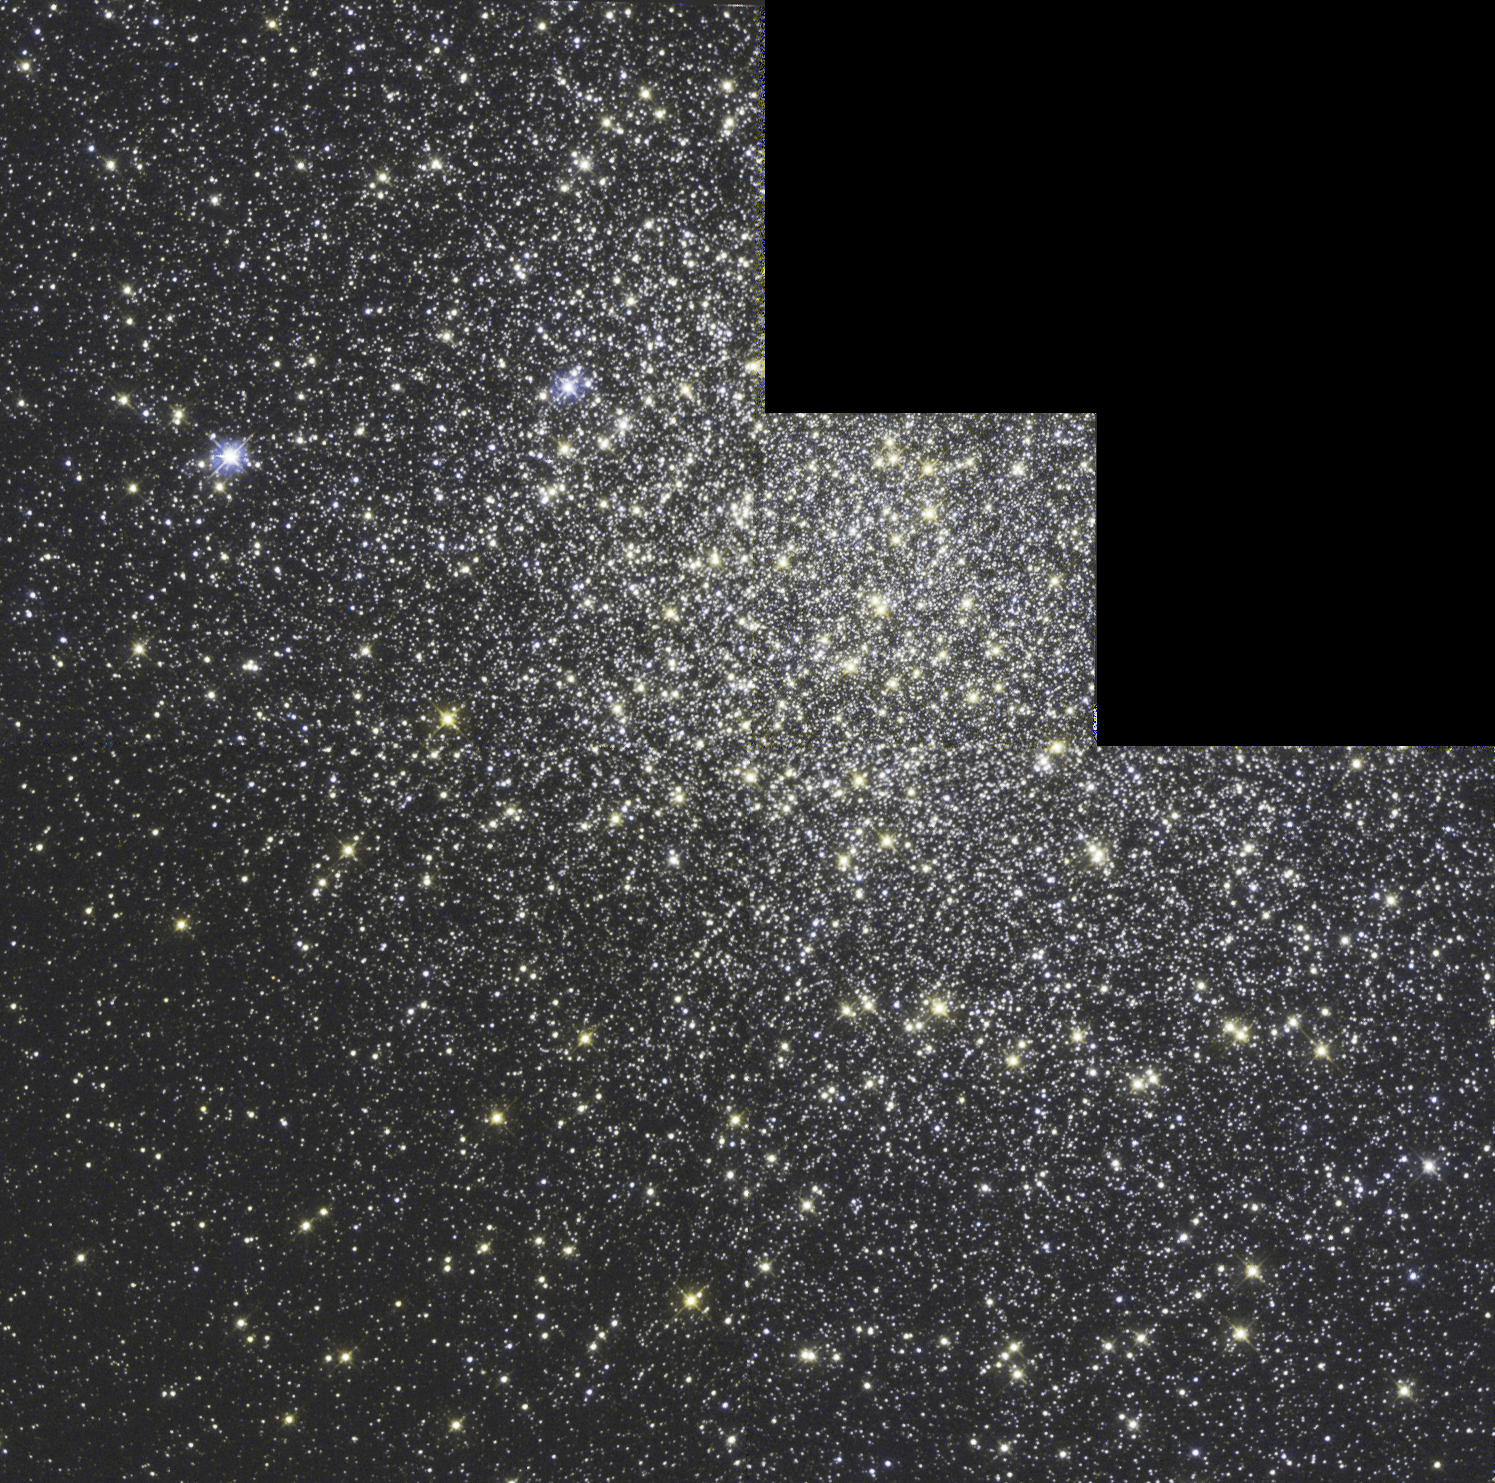 A portion of a globular cluster with thousands of stars with a stair step look due to the detector that was used to take the image.